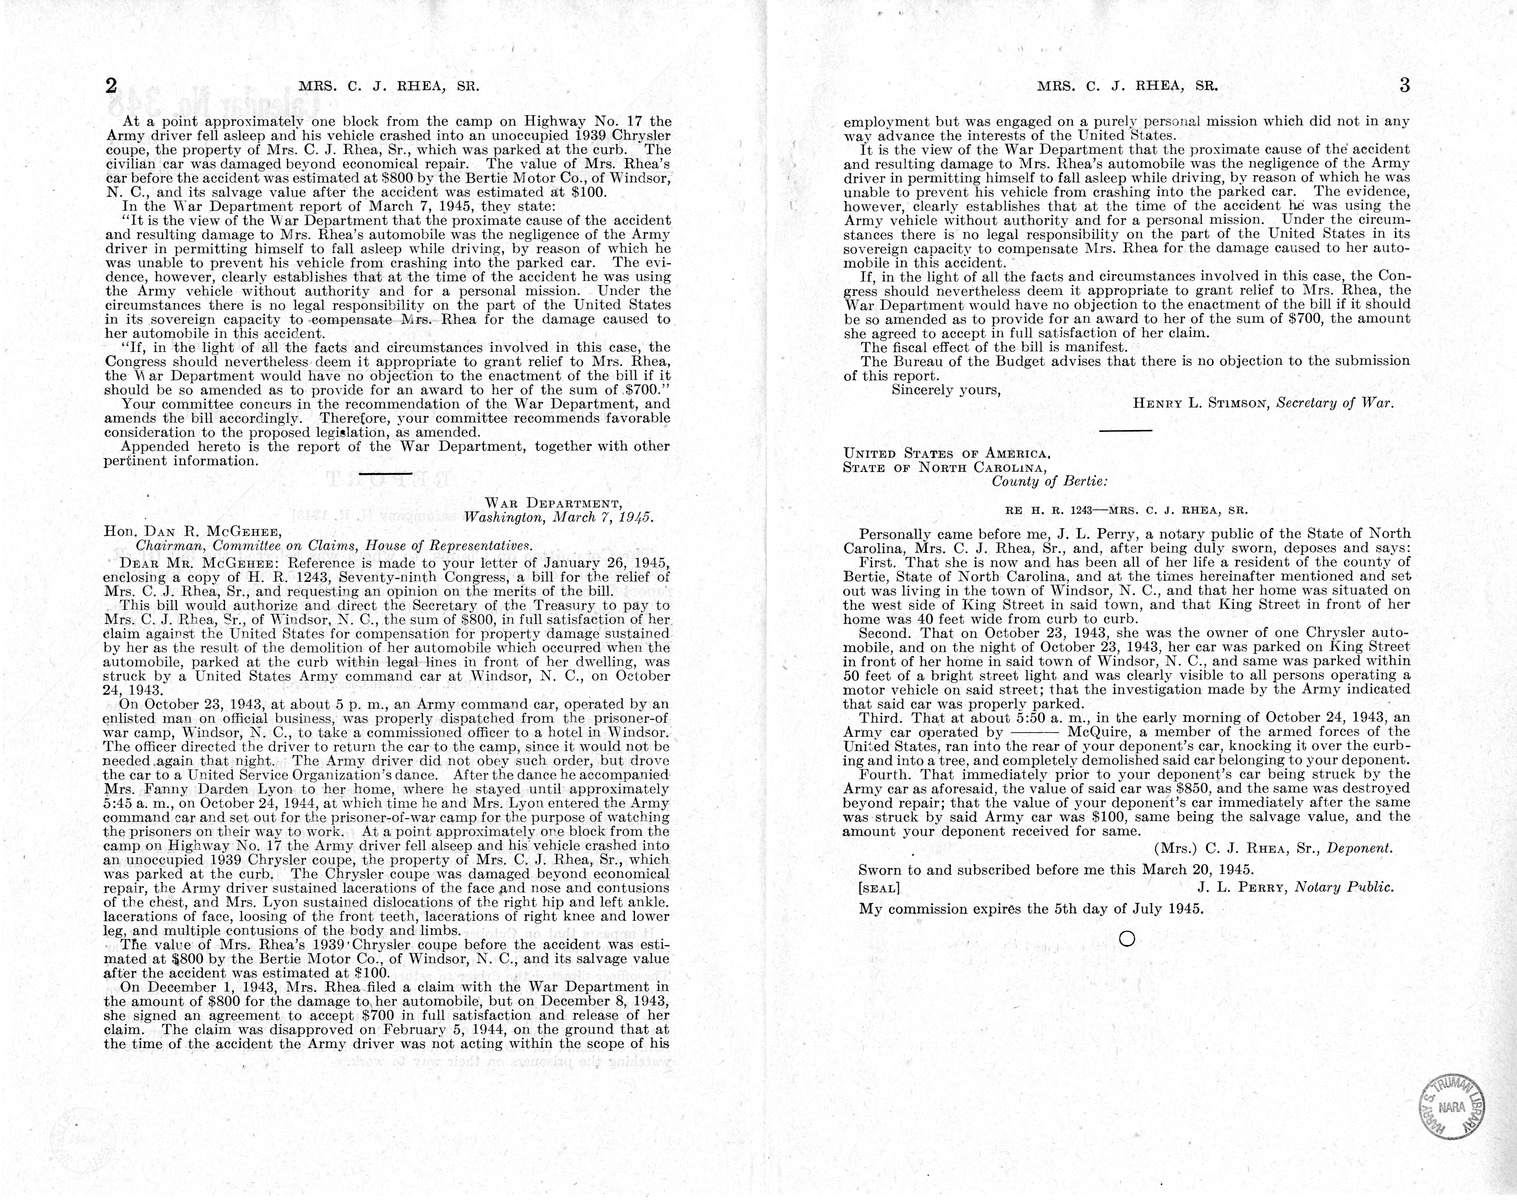 Memorandum from Frederick J. Bailey to M. C. Latta, H.R. 1243, For the Relief of Mrs. C. J. Rhea, Senior, with Attachments